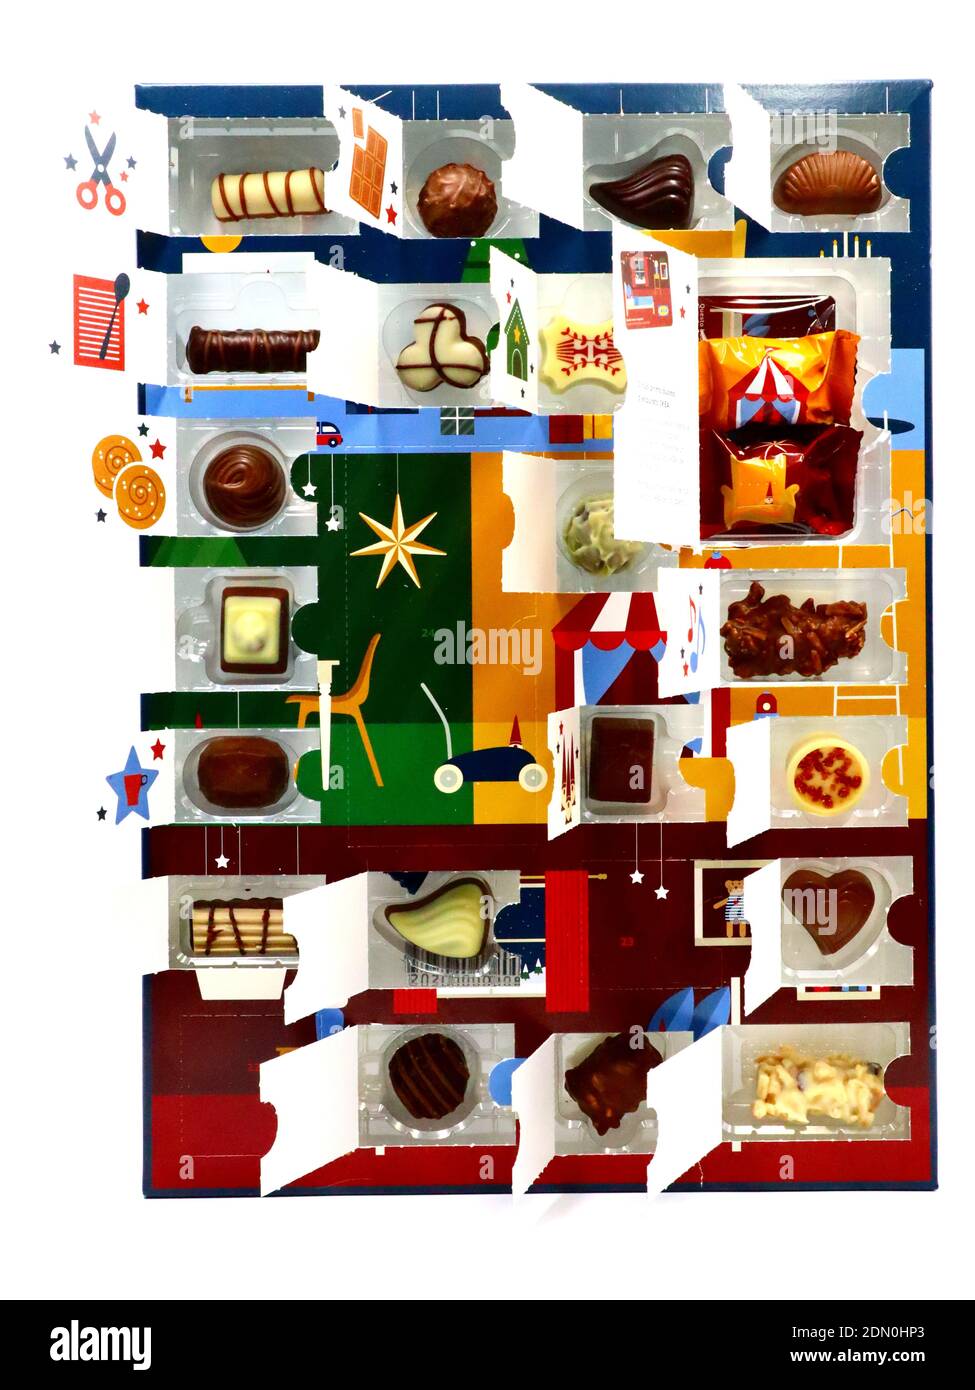 Pessimistisch parachute alias IKEA Advent Calendar: December 21 - IKEA is the world's largest furniture  retailer and sells ready to assemble furniture Stock Photo - Alamy